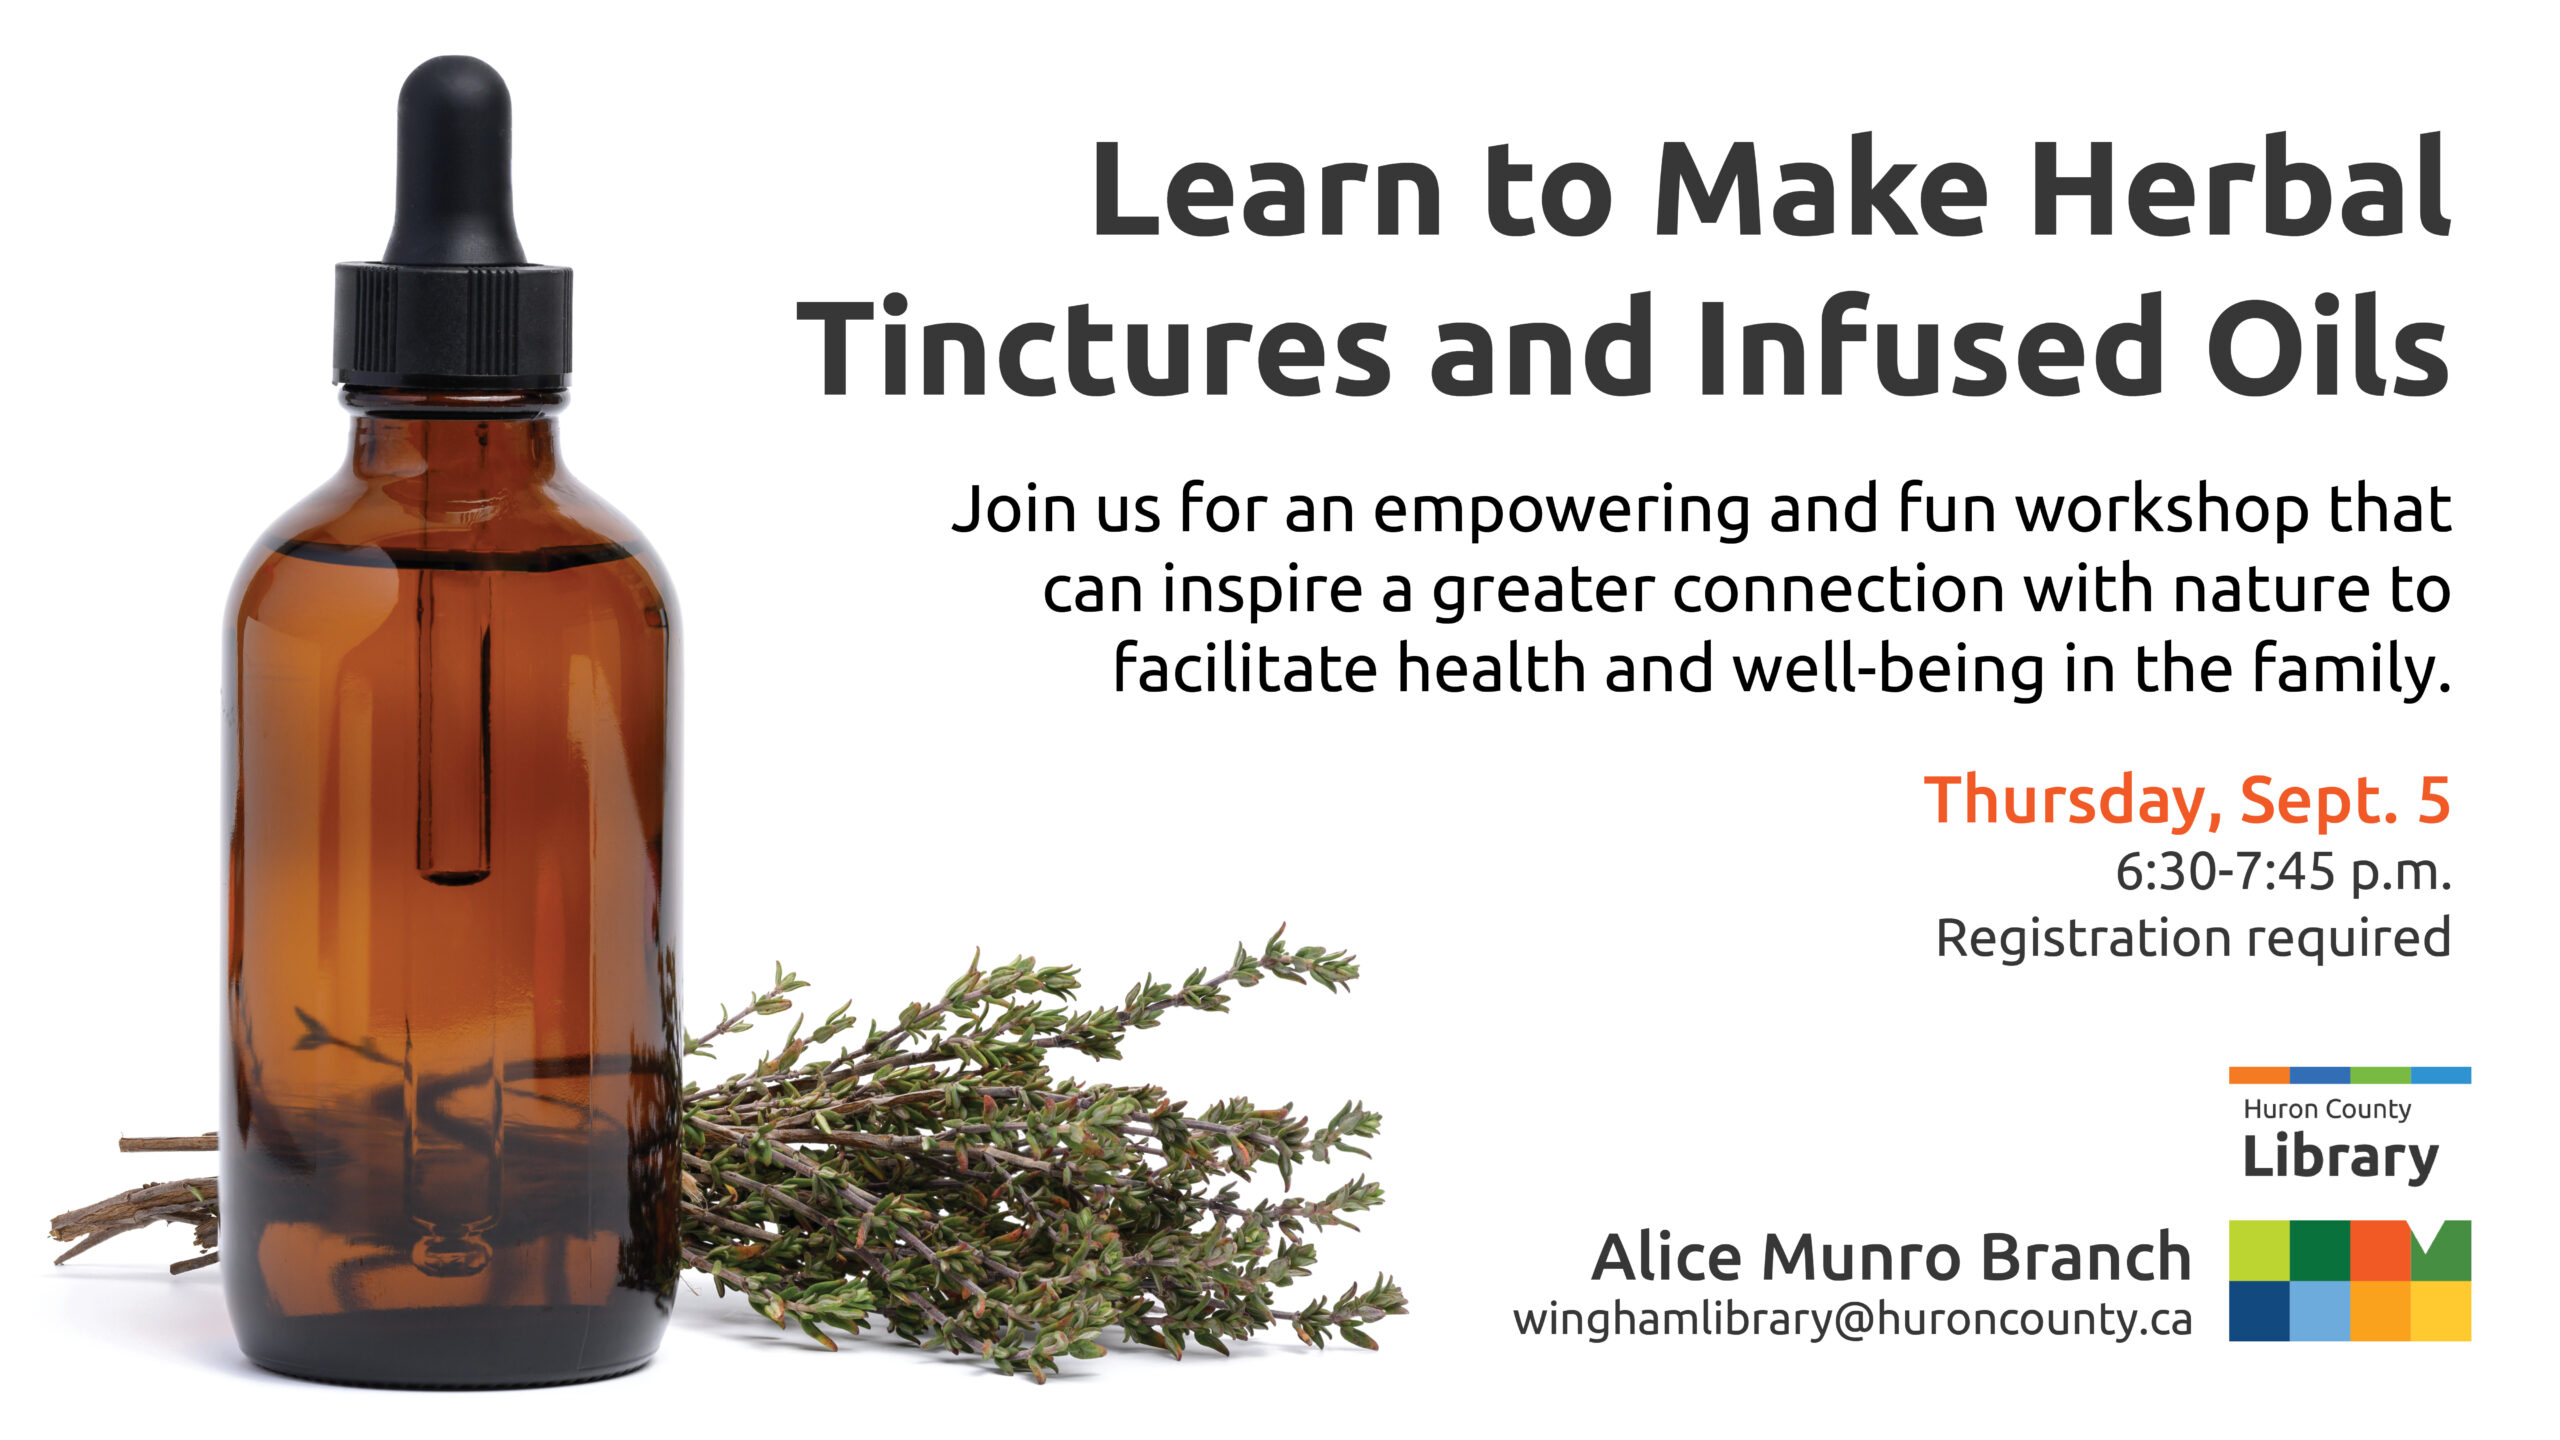 Image of a tincture bottle with text promoting herbal tincture workshop at Wingham